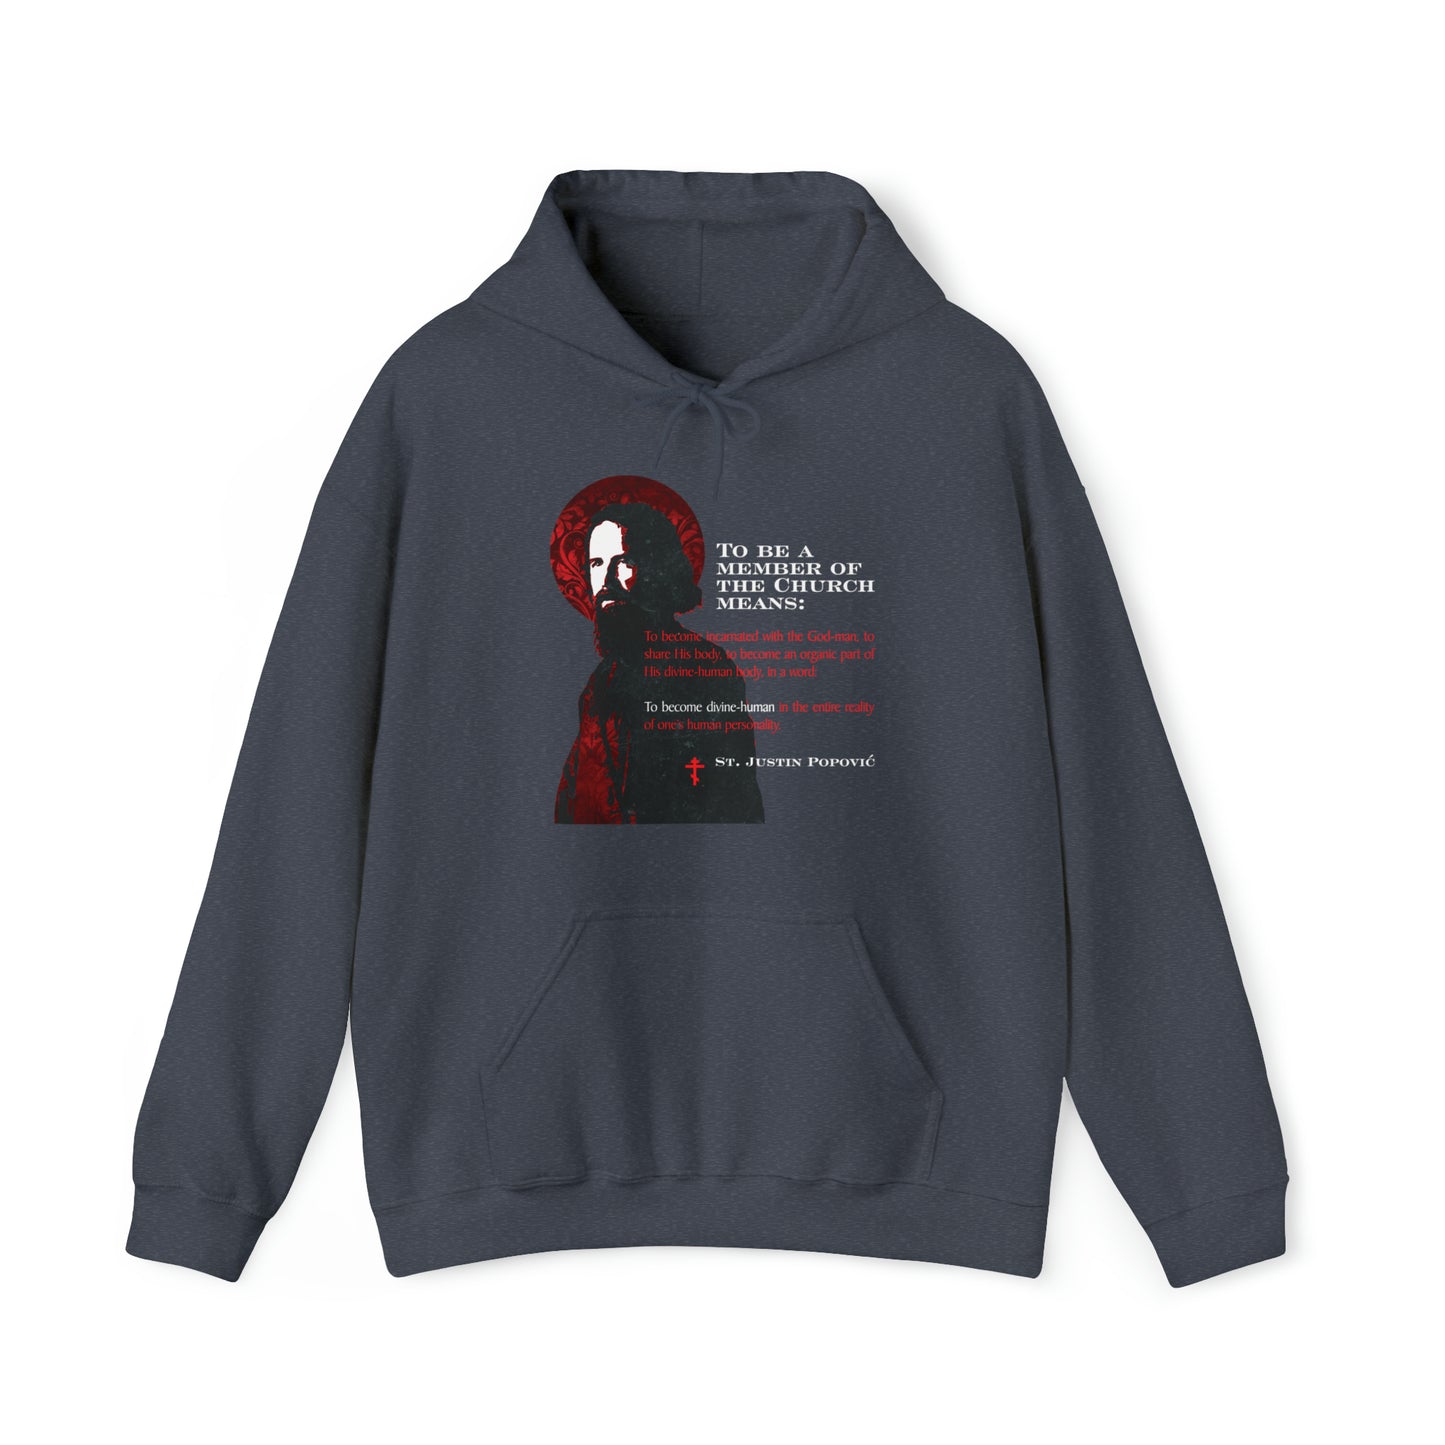 To Be a Member of the Church (St. Justin Popovic) No. 1 | Orthodox Christian Hoodie / Hooded Sweatshirt